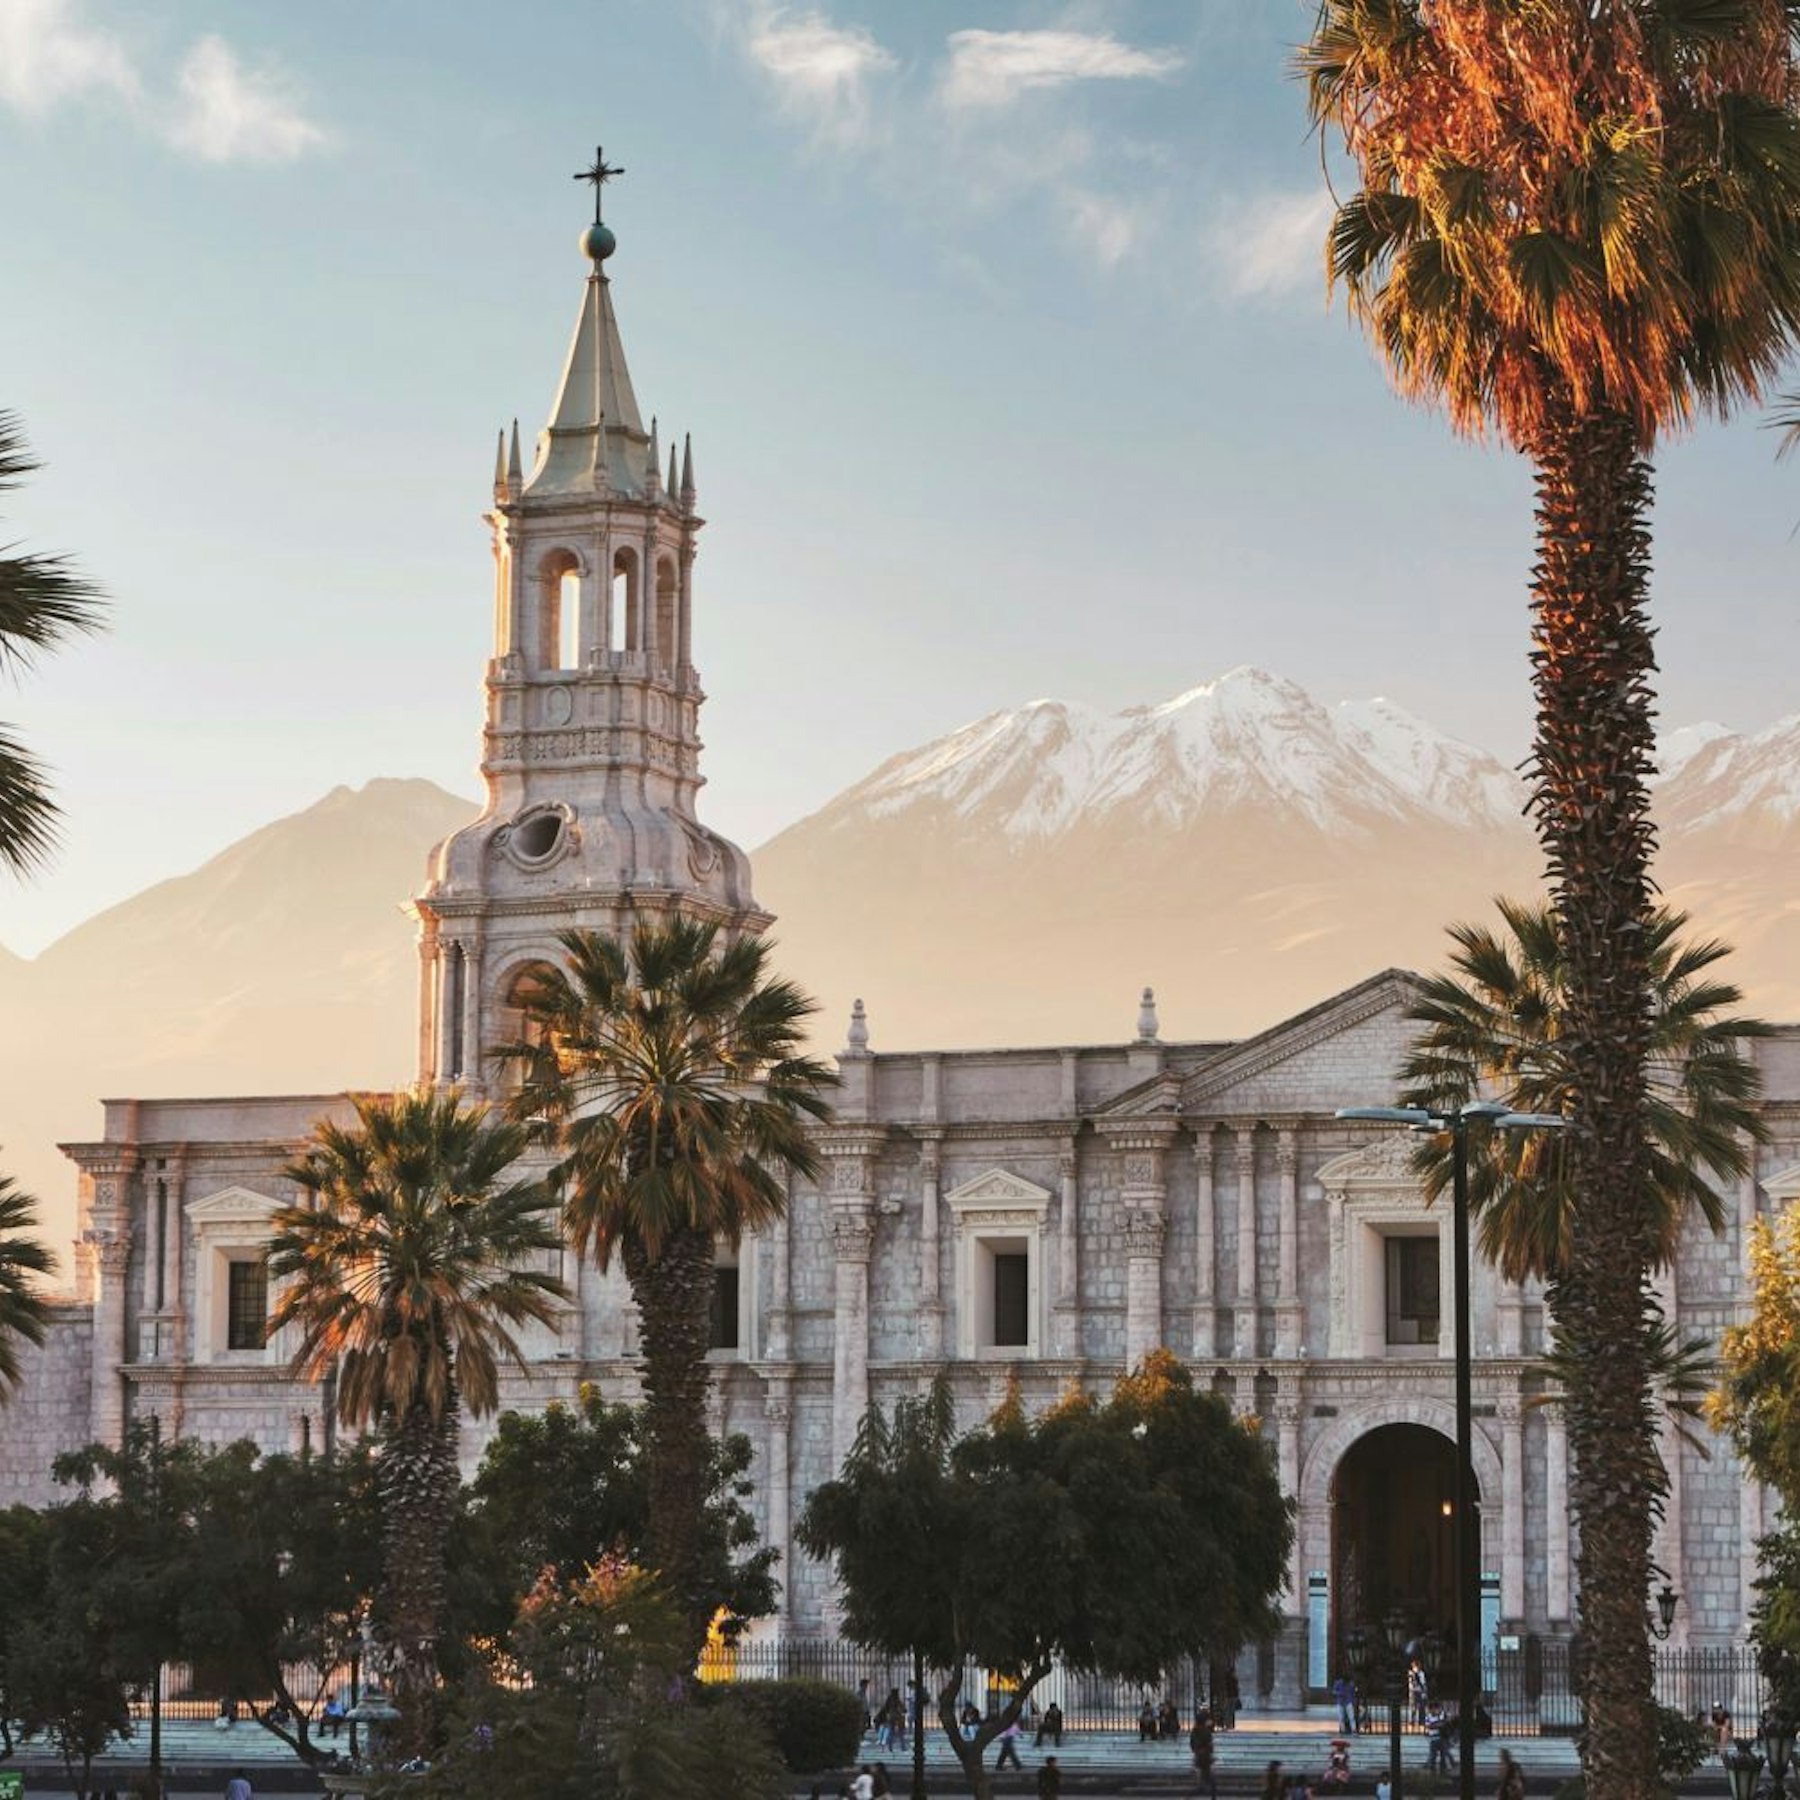 Arequipa's Cathedral in the Plaza de Armas